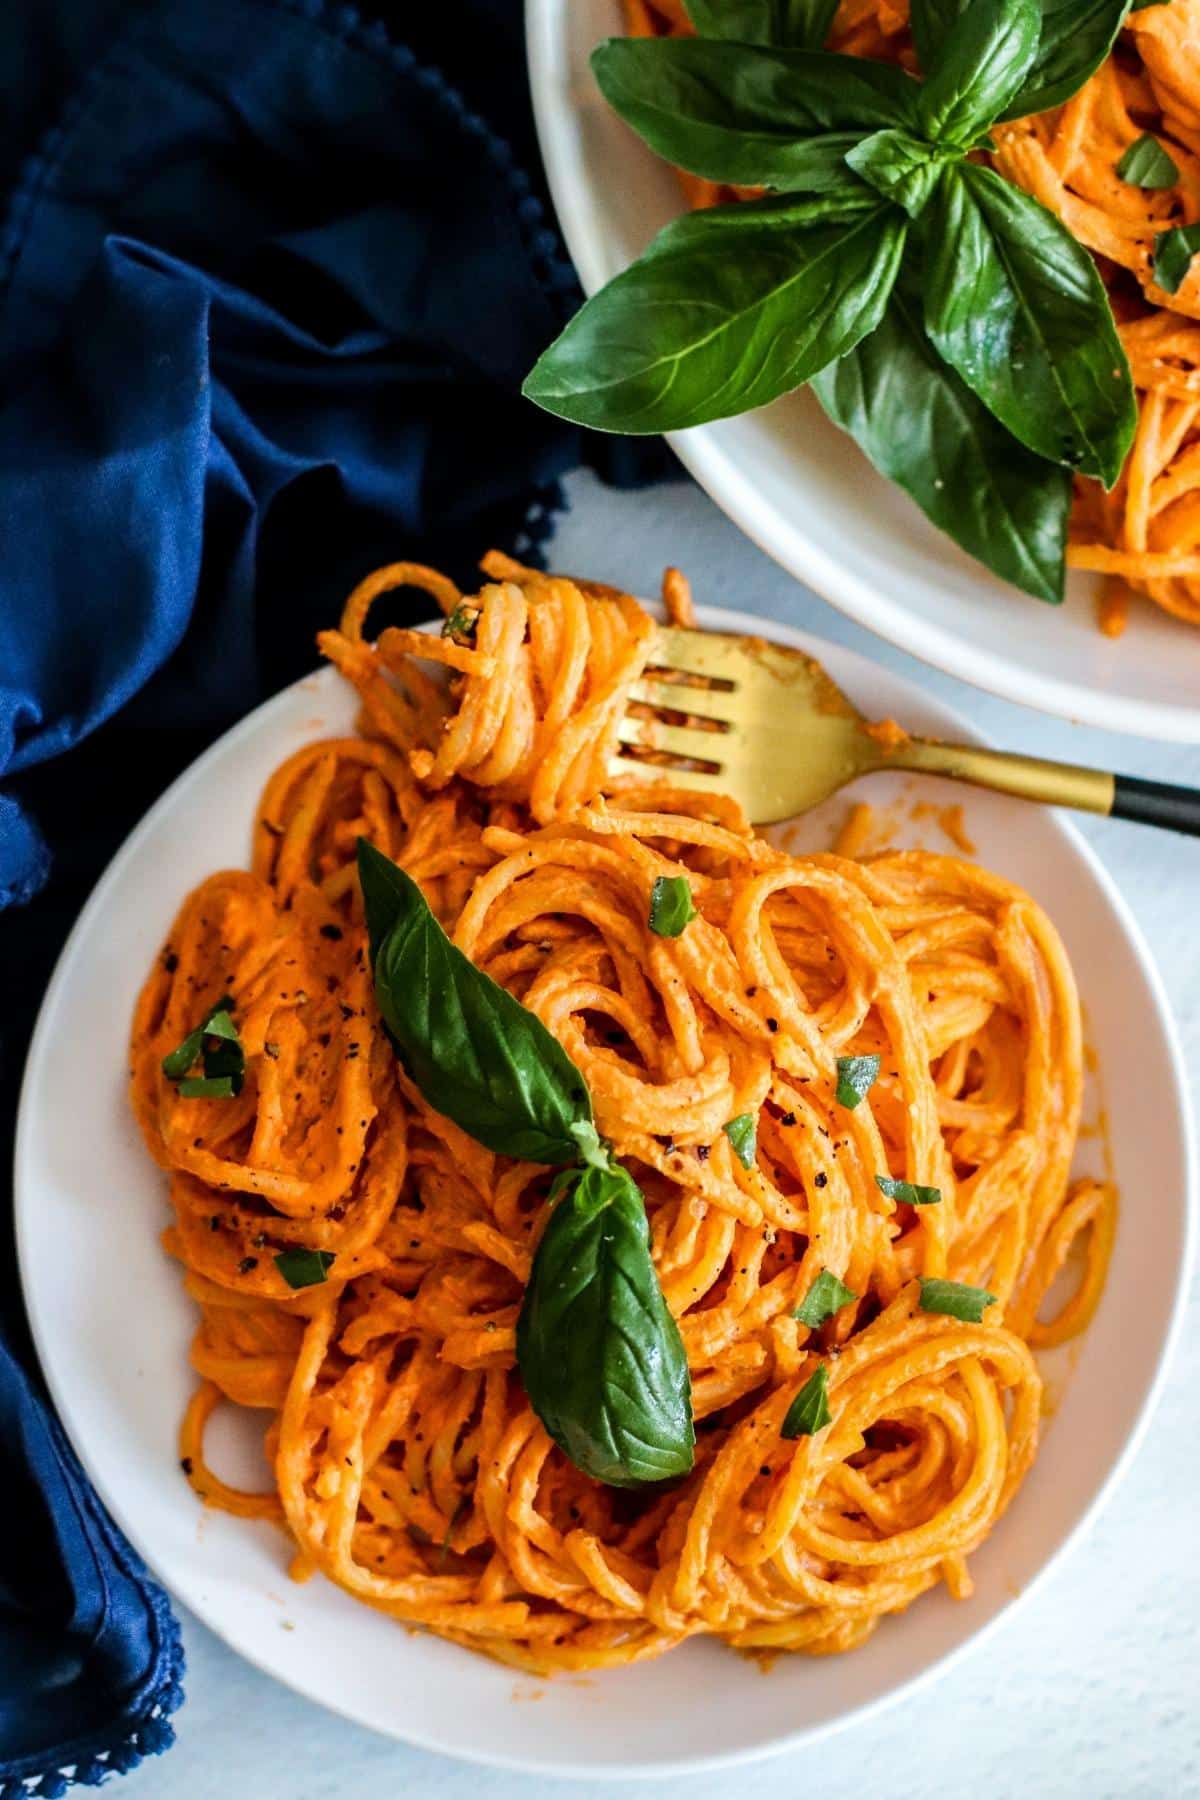 Gold fork twirling spaghetti on a plate of pasta garnished with fresh basil leaves.